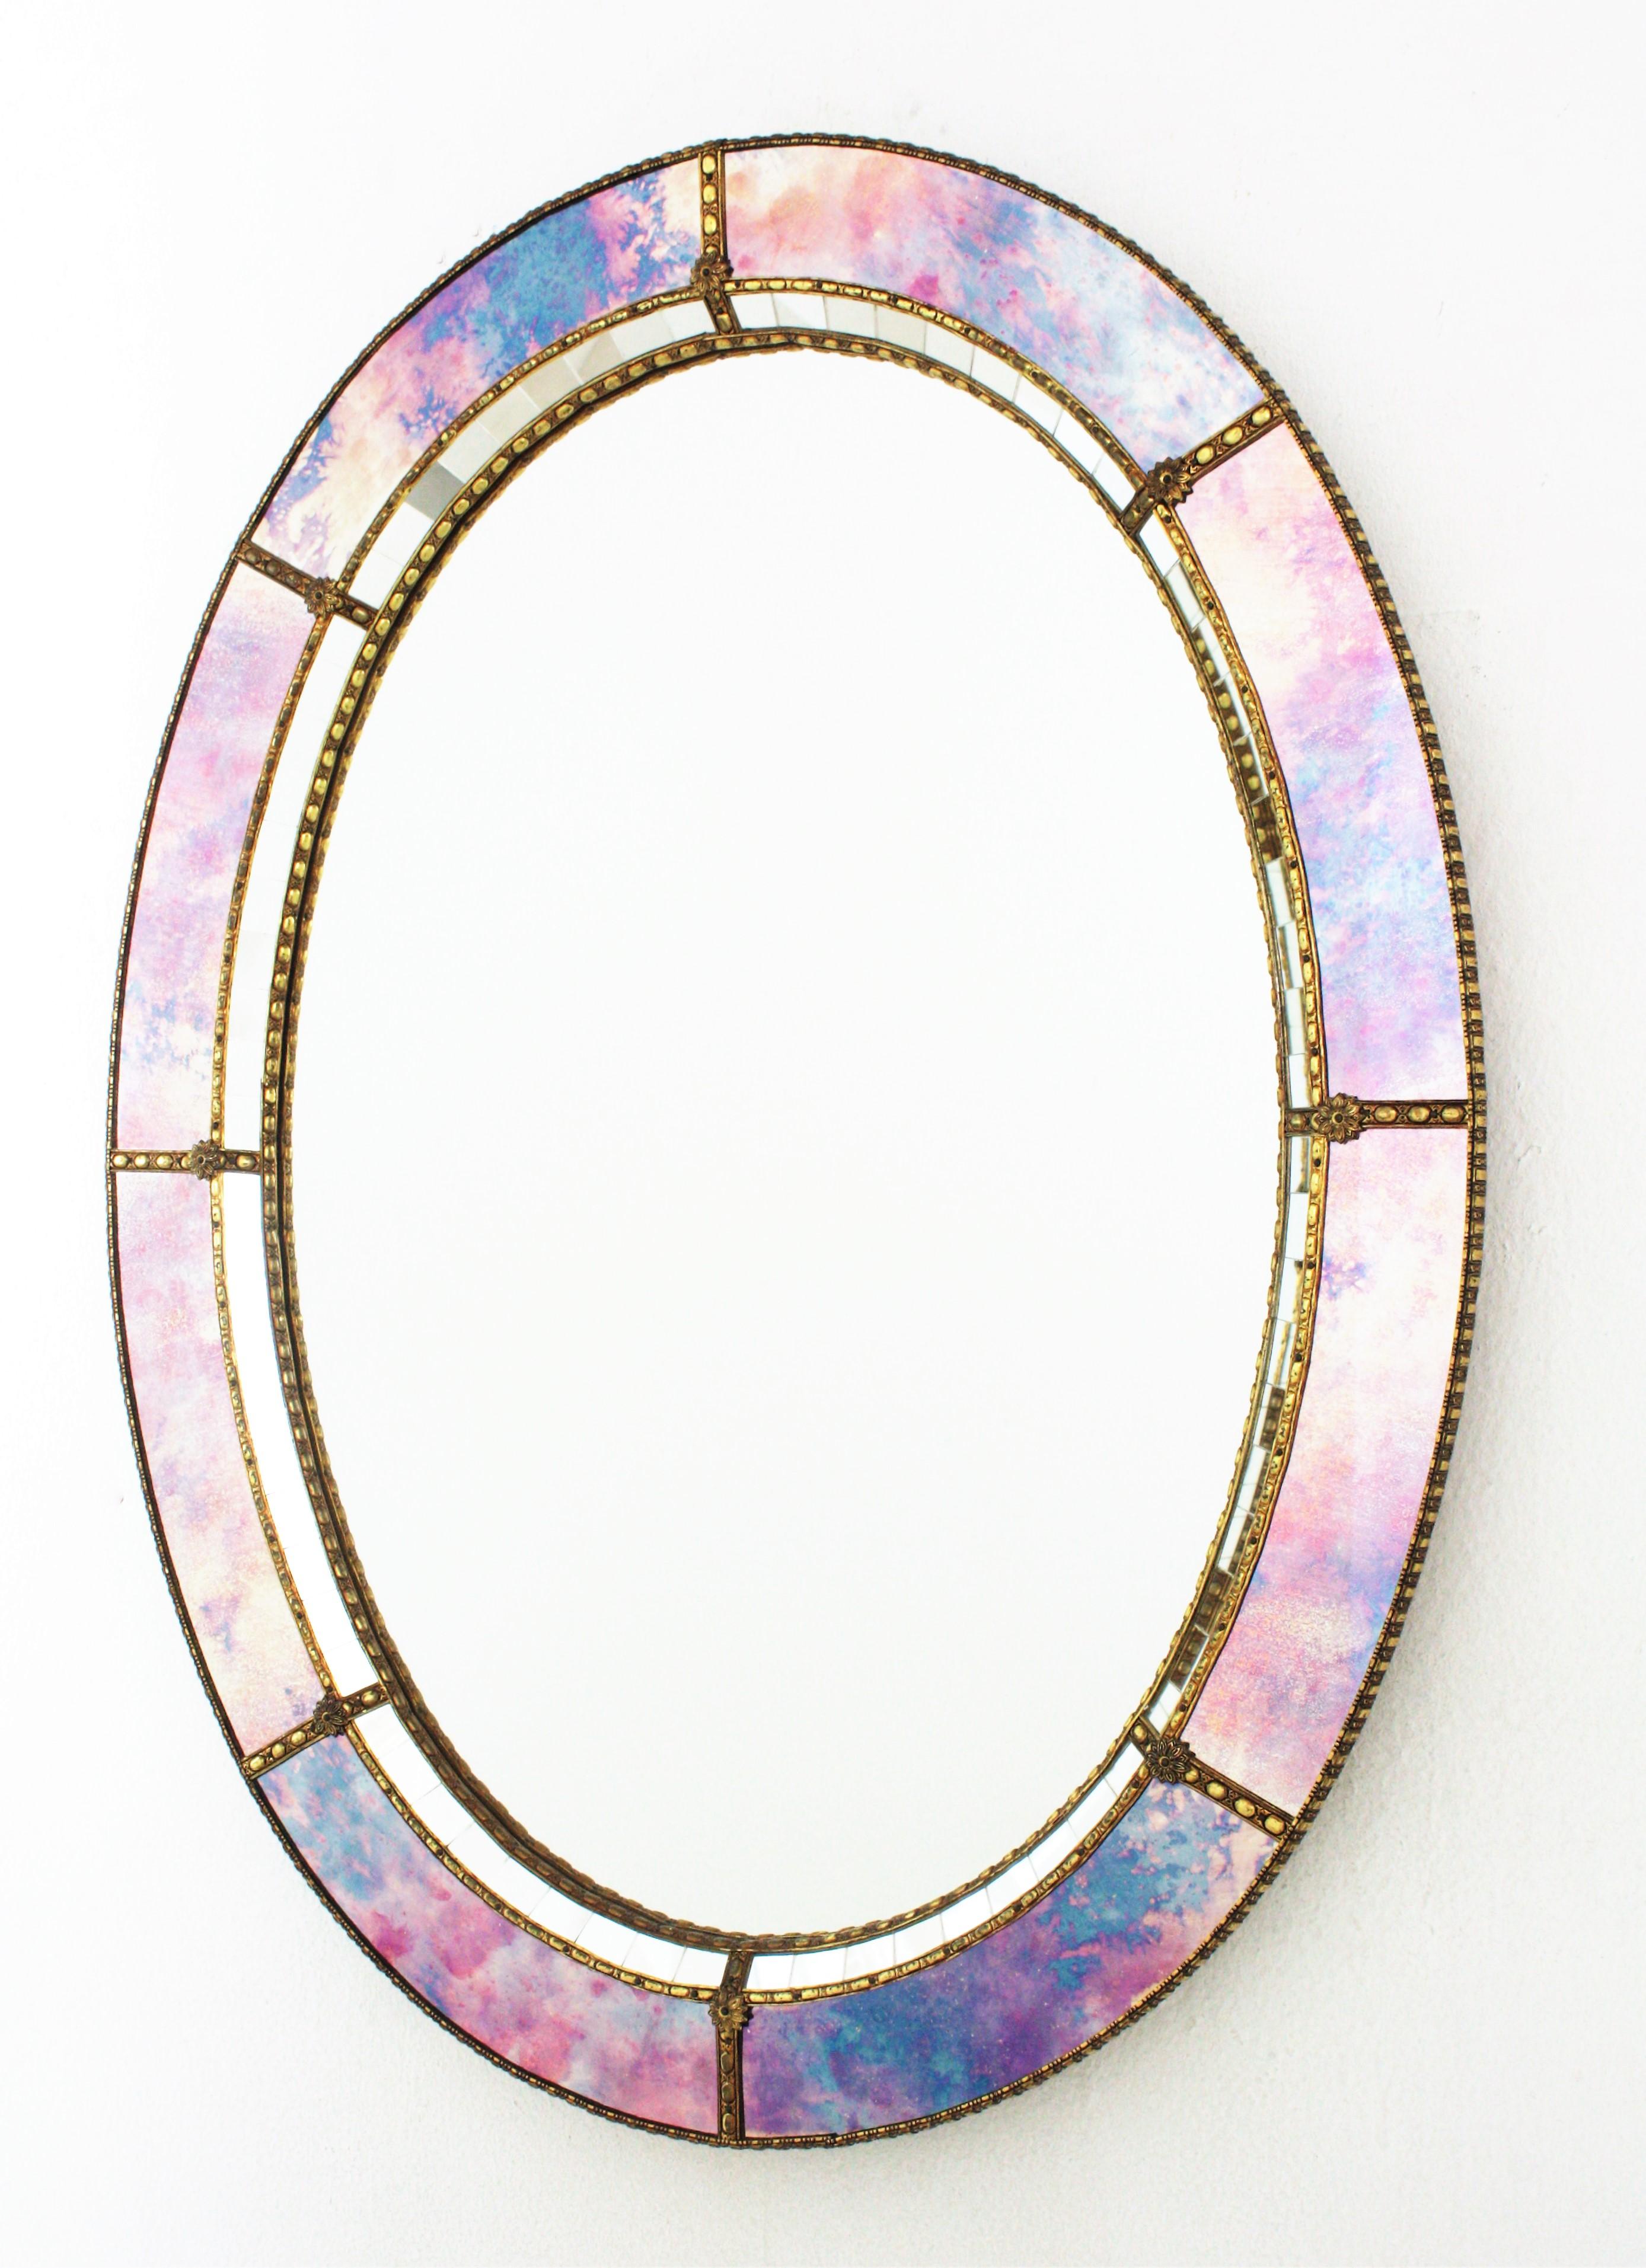 Oval Venetian Style Mirror with Brass Details 2